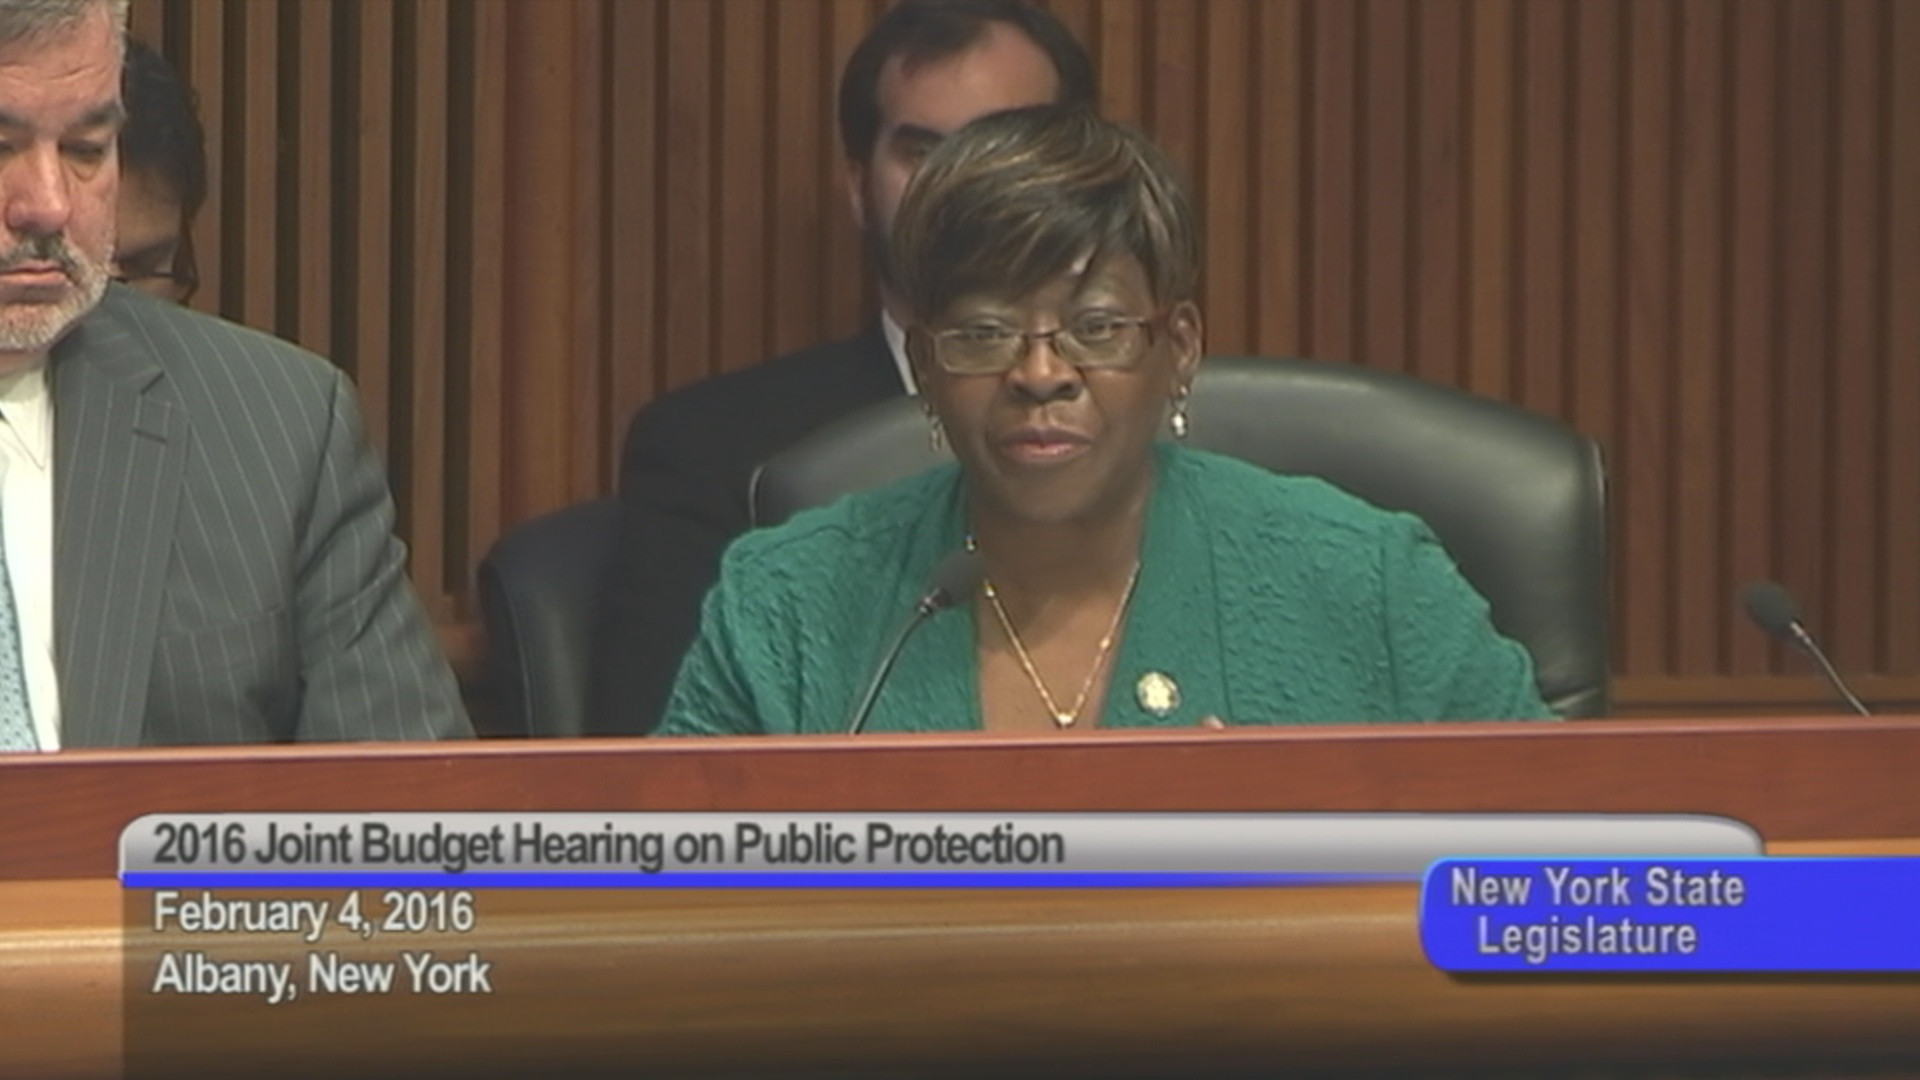 Assemblymember Peoples-Stokes Addresses Chief Administrative Judge Marks On Staff